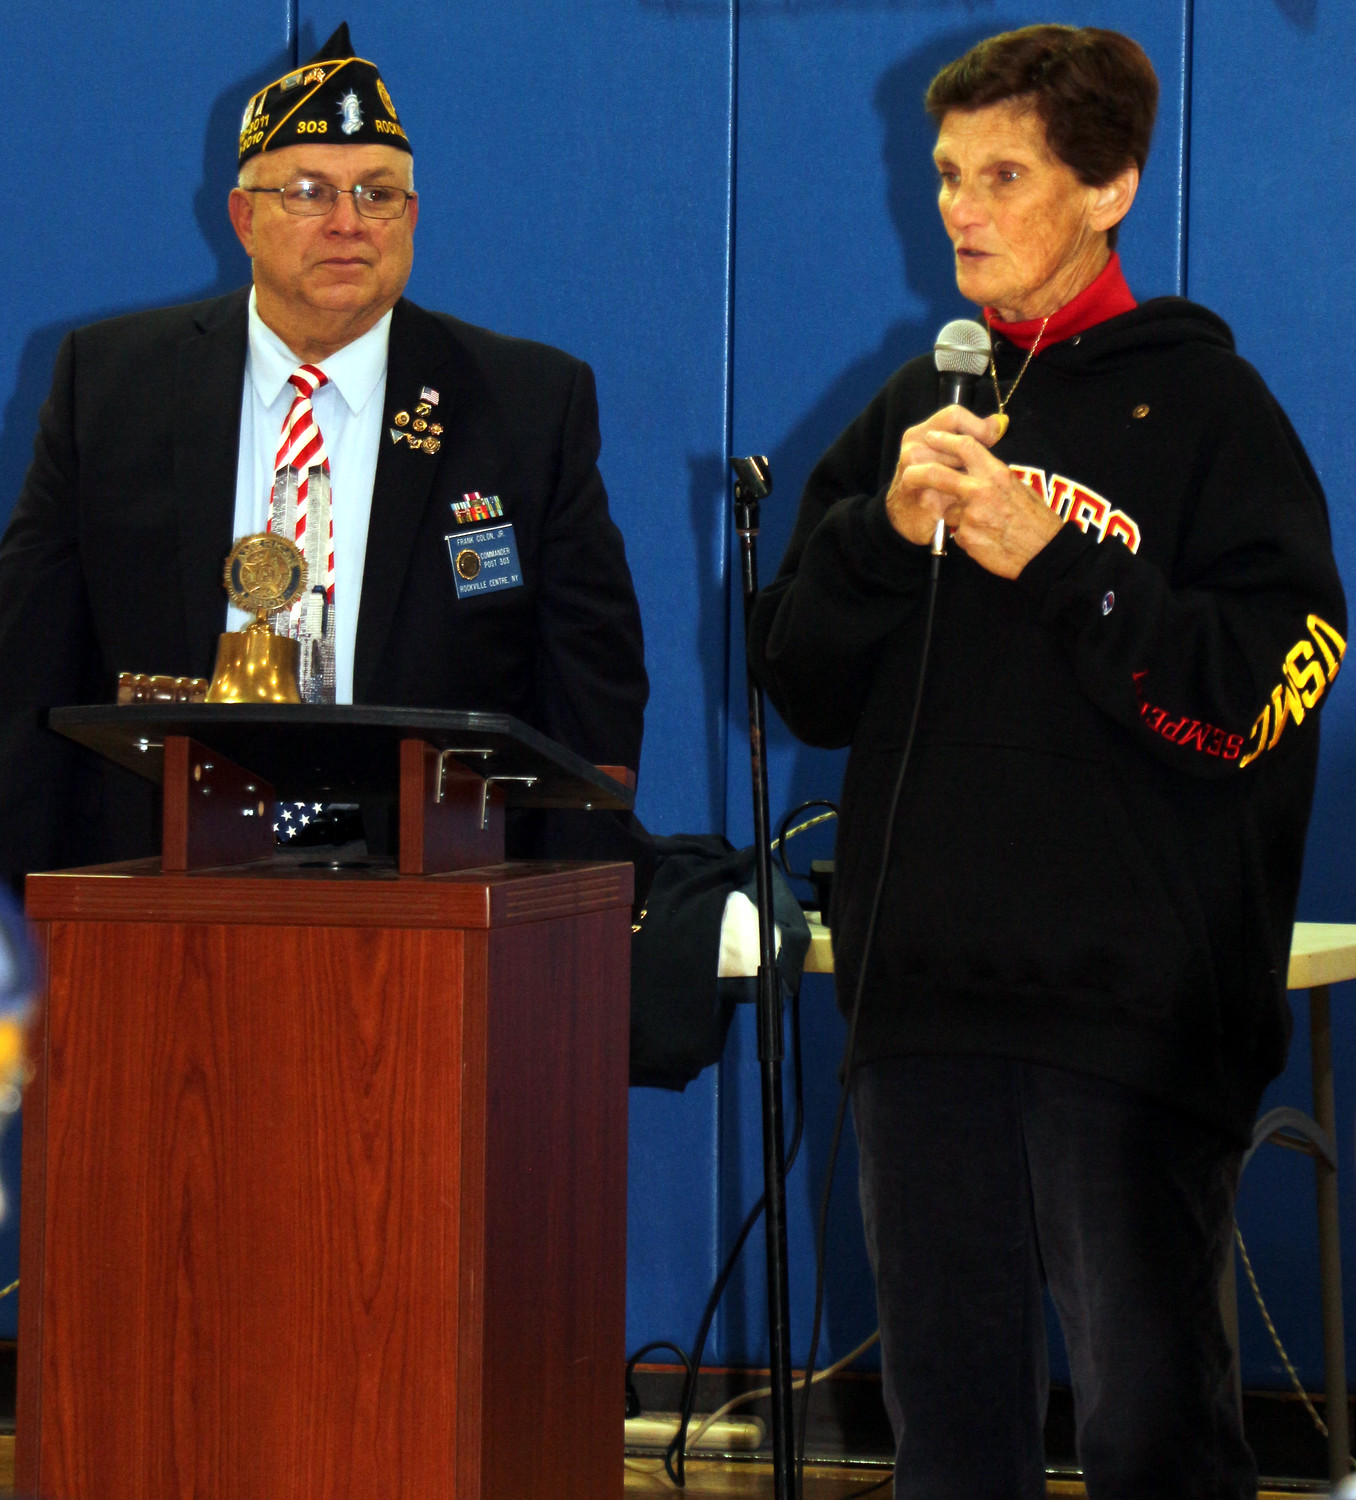 Winchester, right, alongside Colon, addressed the crowd at the ceremony.